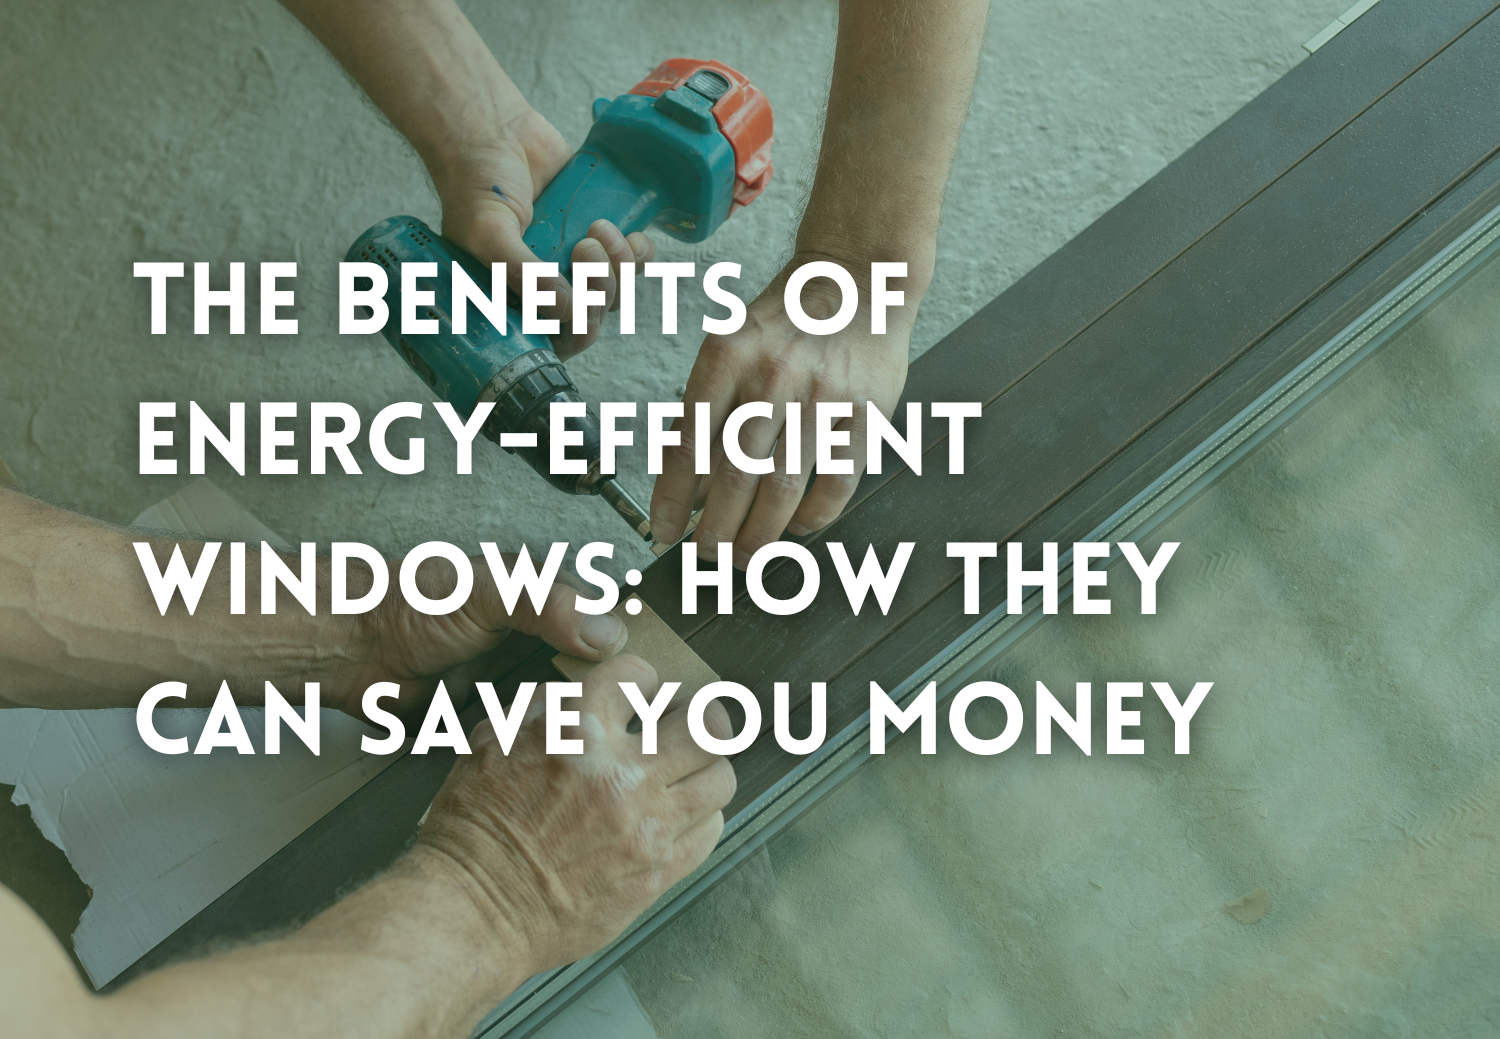 The Benefits of Energy-Efficient Windows: How They Can Save You Money